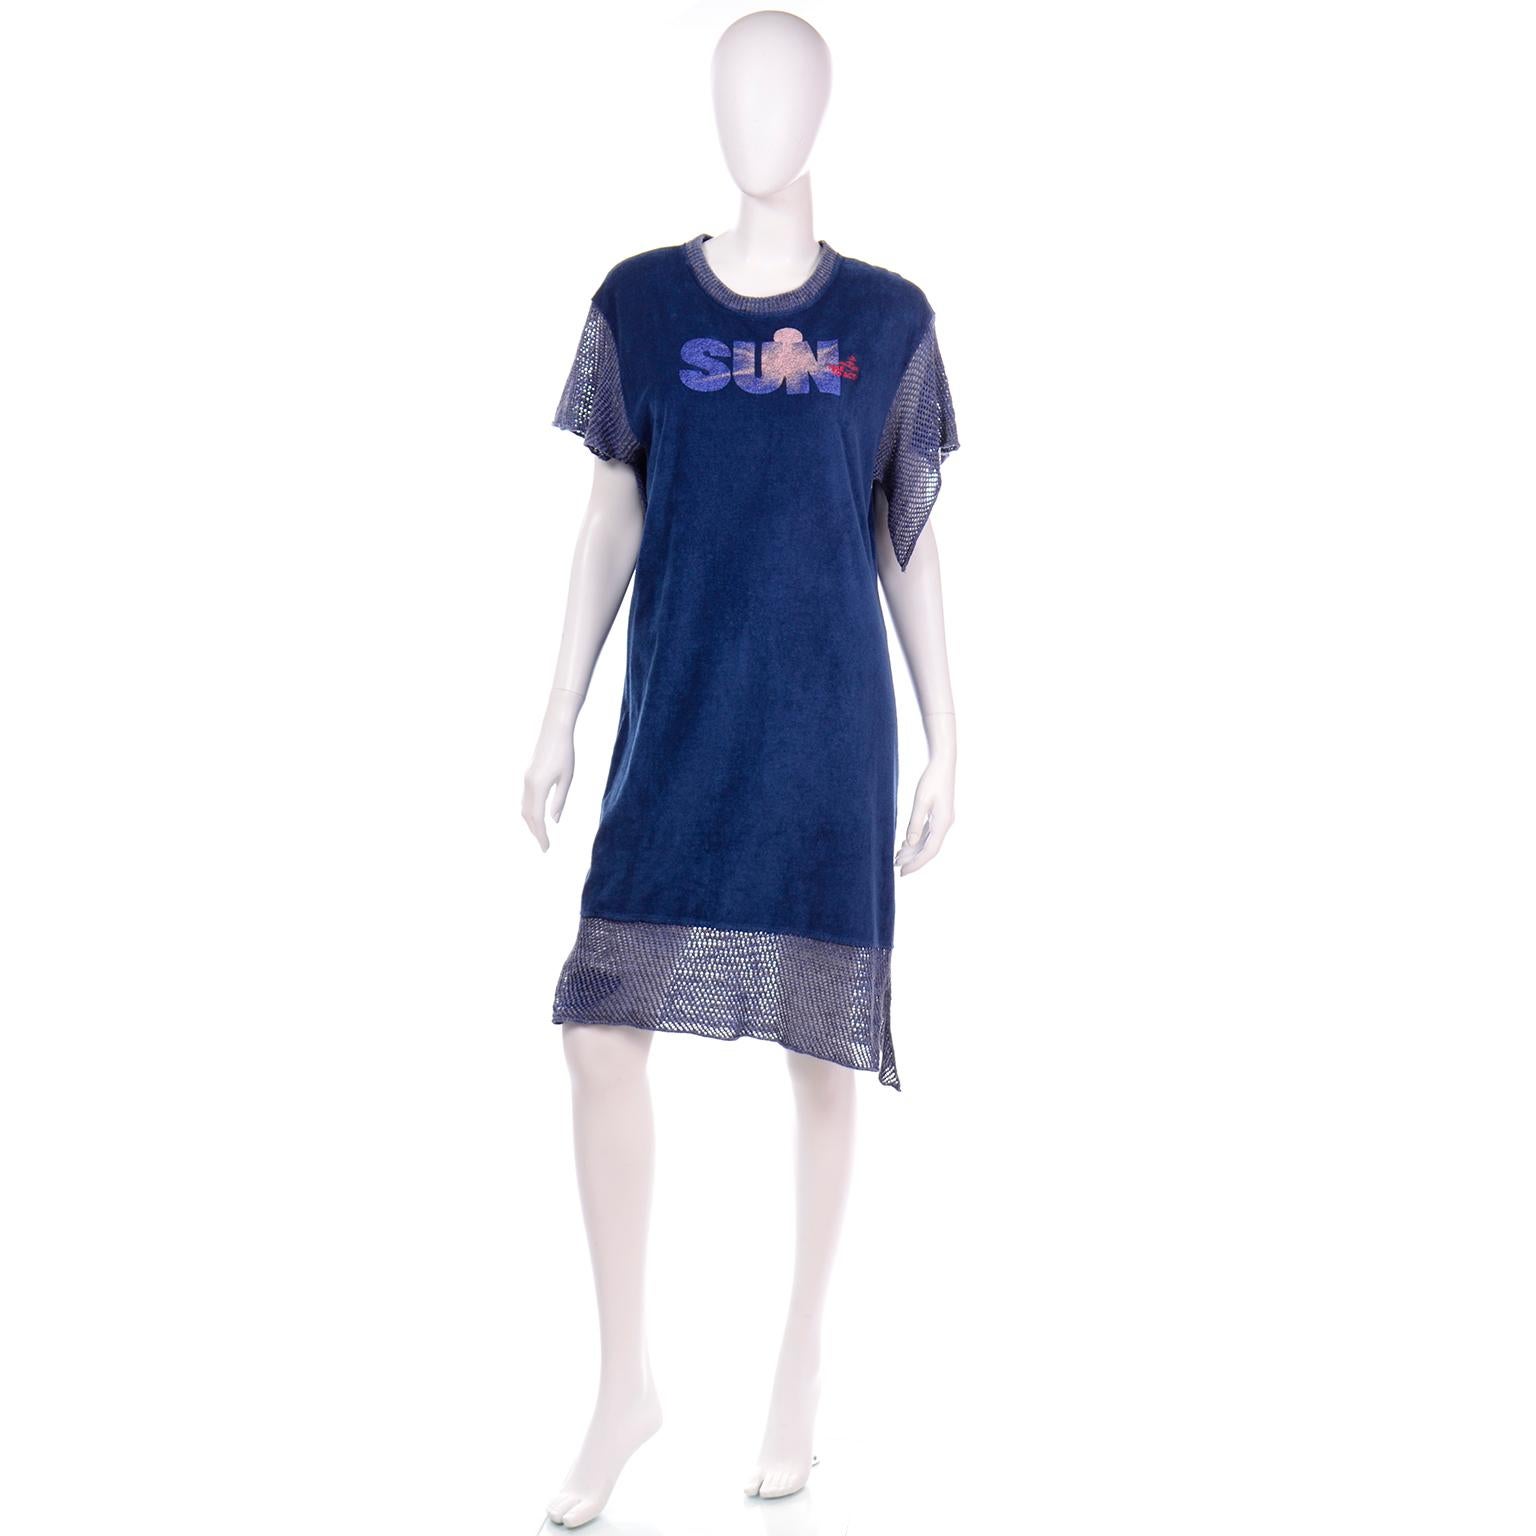 This blue Vivienne Westwood dress is in a blue terry cloth fabric with blue crochet knit trim. The fabric has a brushed or velveteen feel and the dress has a 1970’s style sun on the front with Westwood’s tagline; “Time To Act” with her logo above.